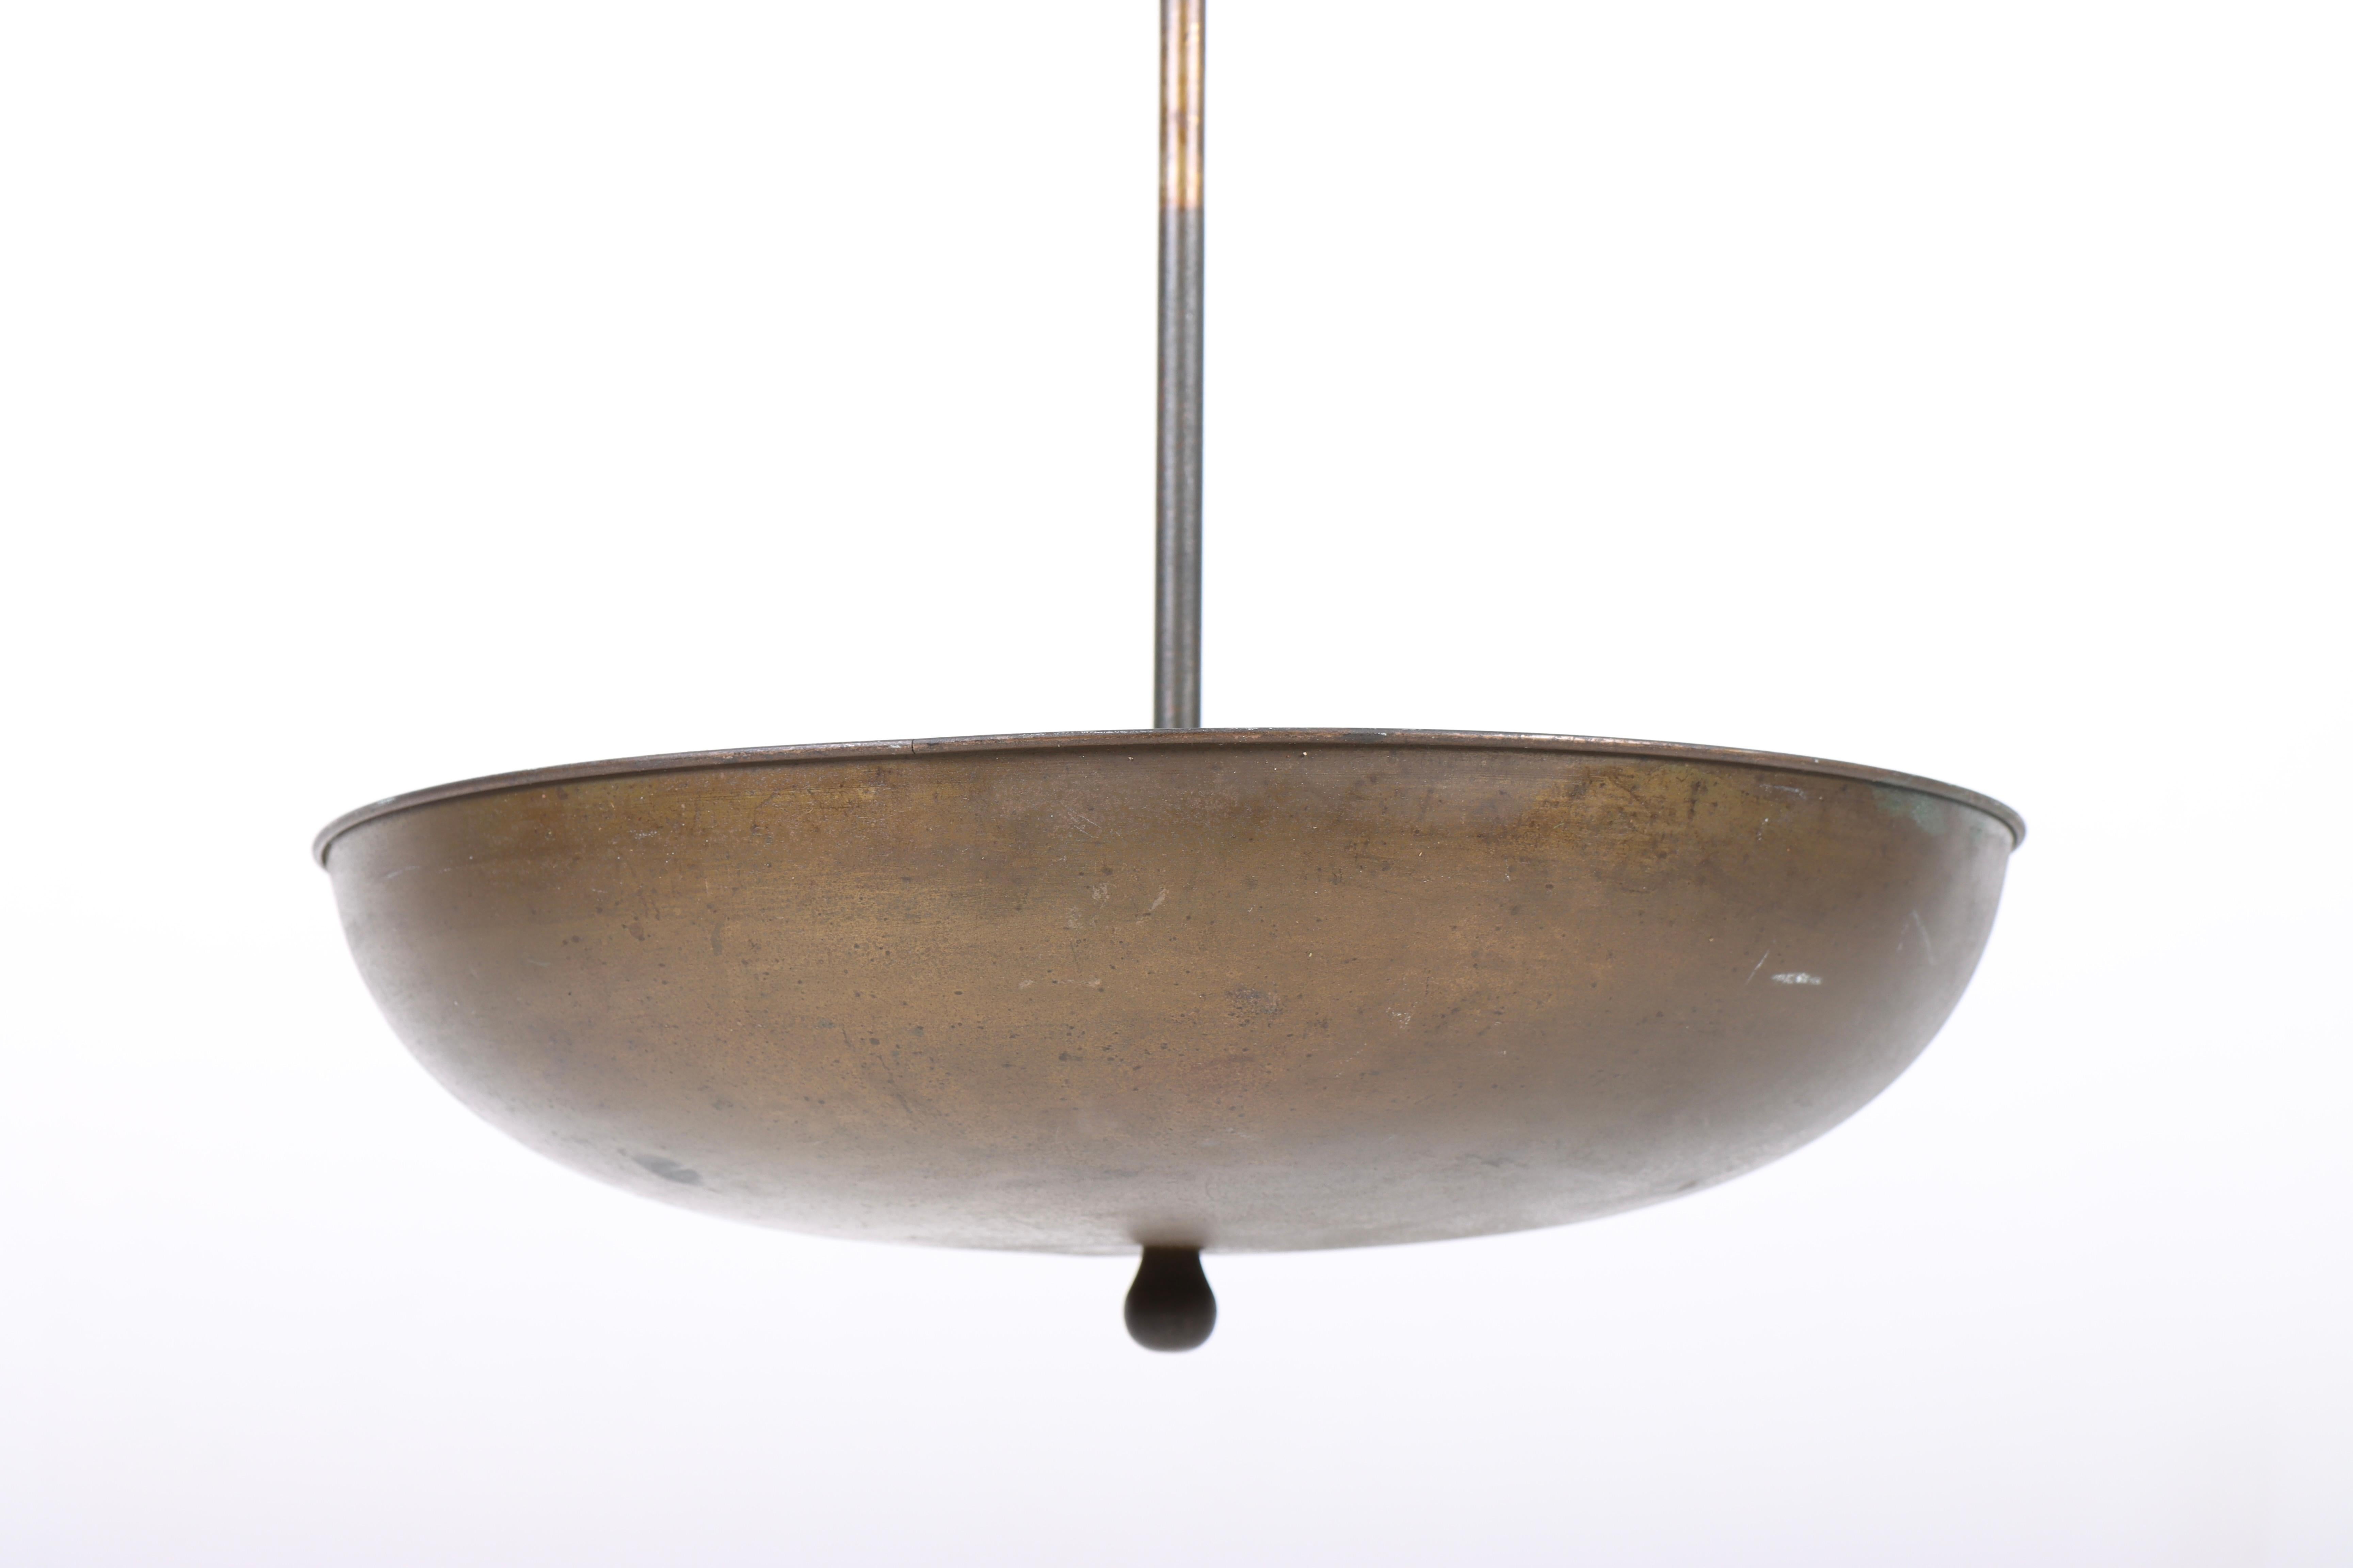 Rare ceiling lamp / uplight in painted brass, designed and made in Denmark 1940s. Great original condition.